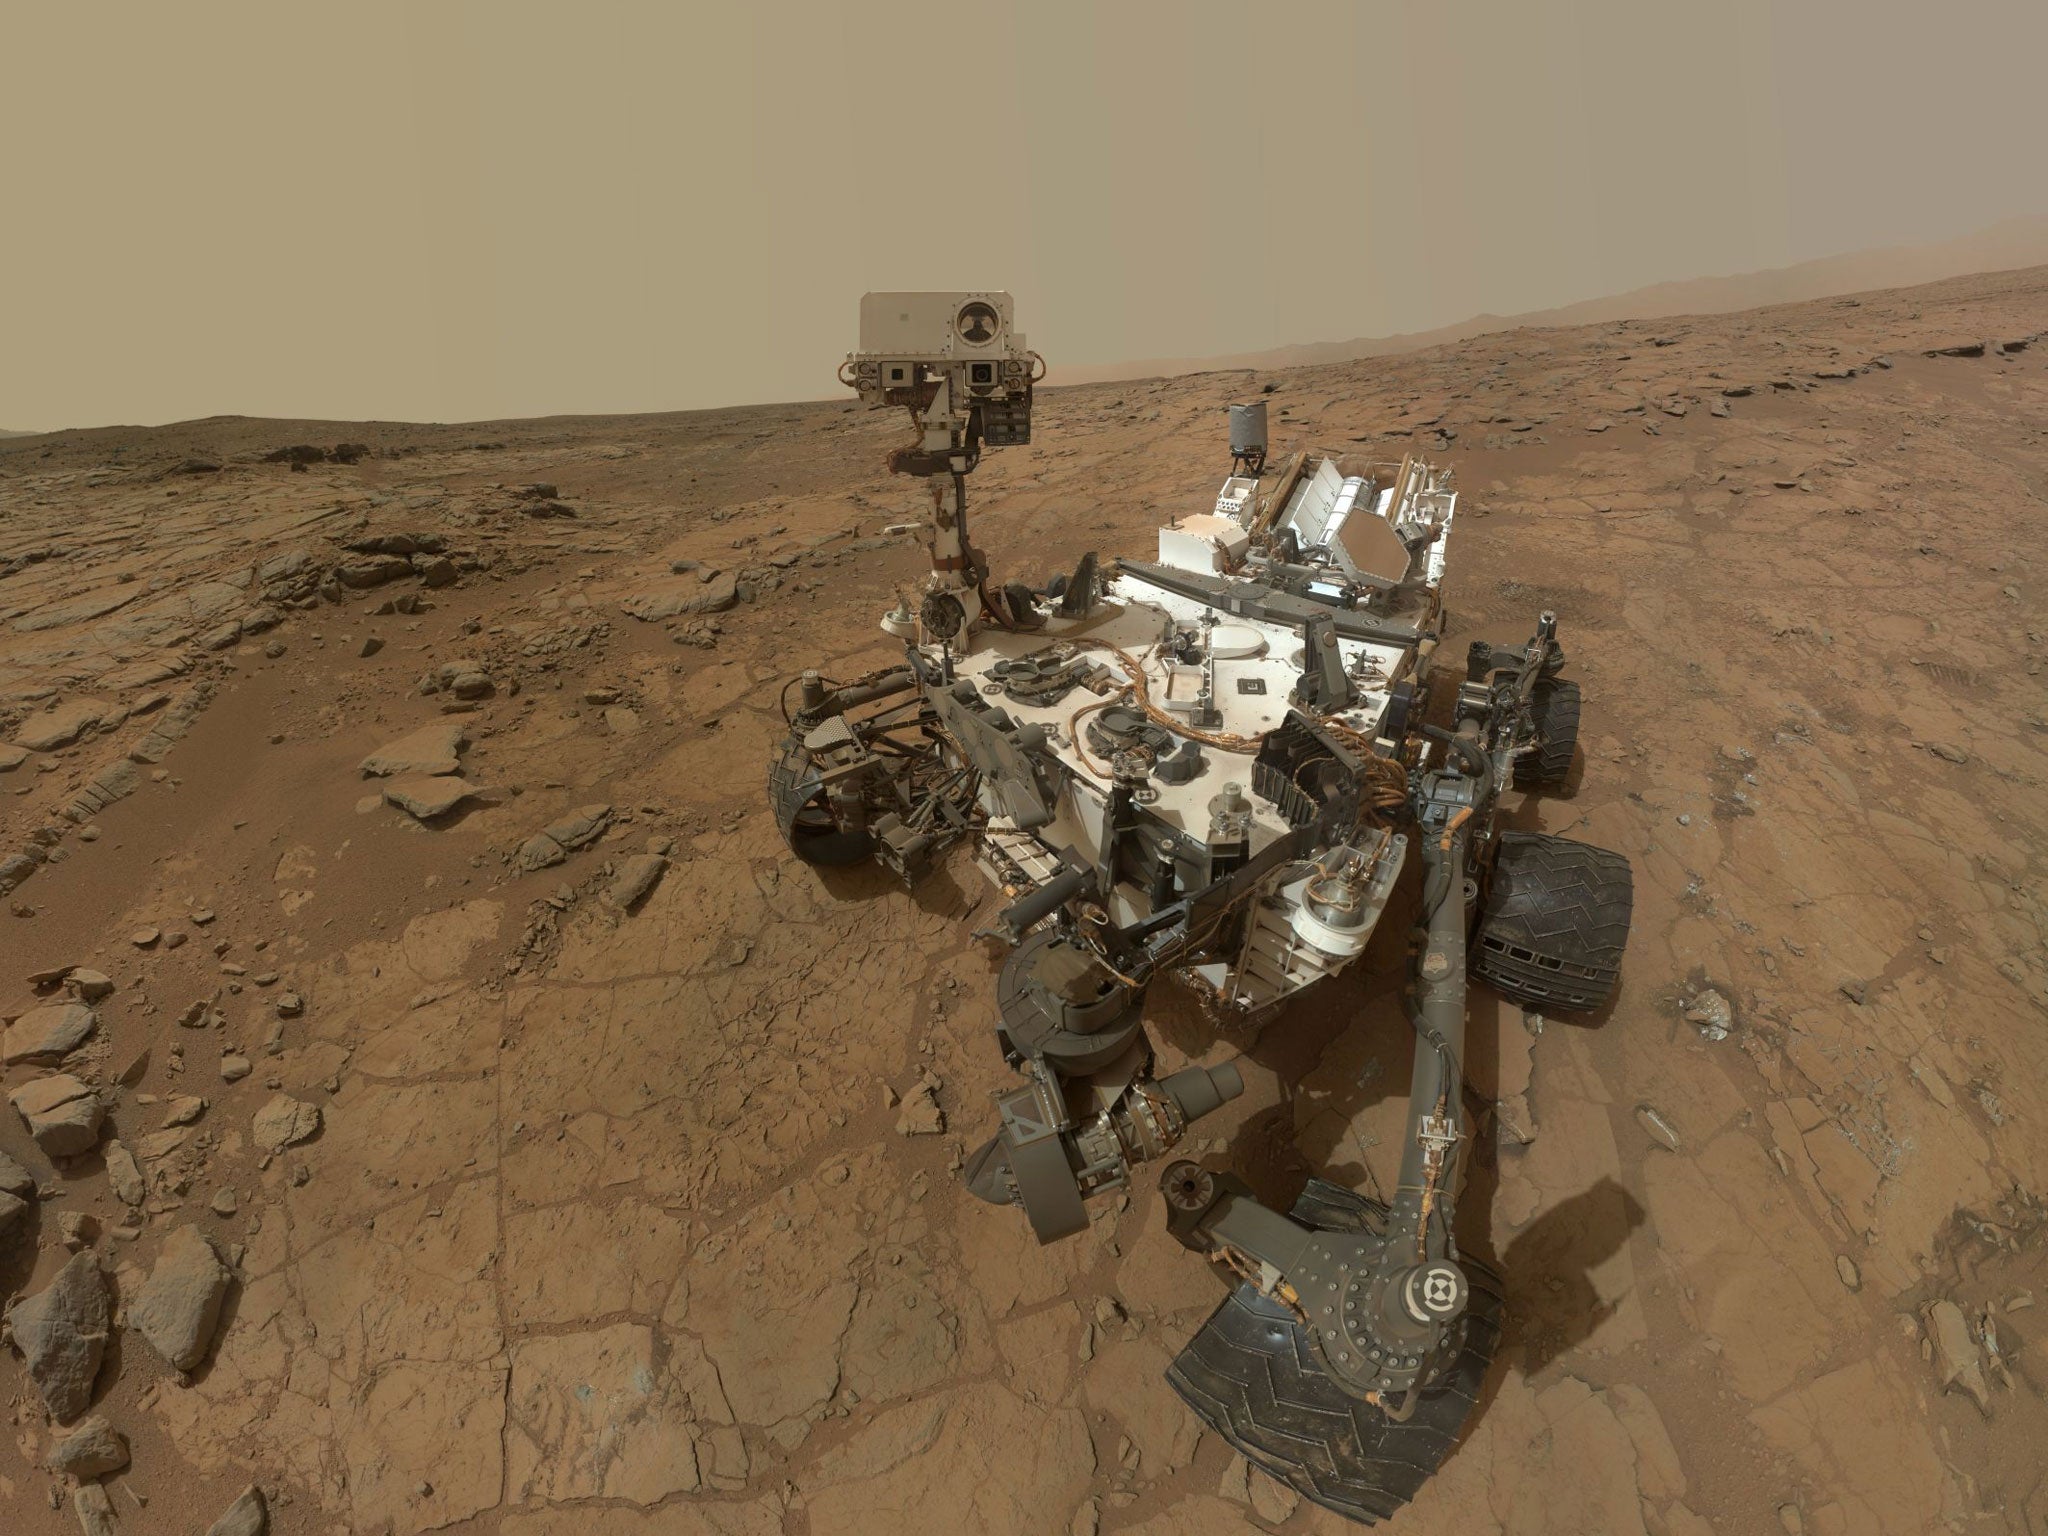 A self-portrait of the Mars rover Curiosity combines dozens of exposures taken by the rover's Mars Hand Lens Imager (MAHLI) during the 177th Martian day, or sol, of Curiosity's work on the planet Mars